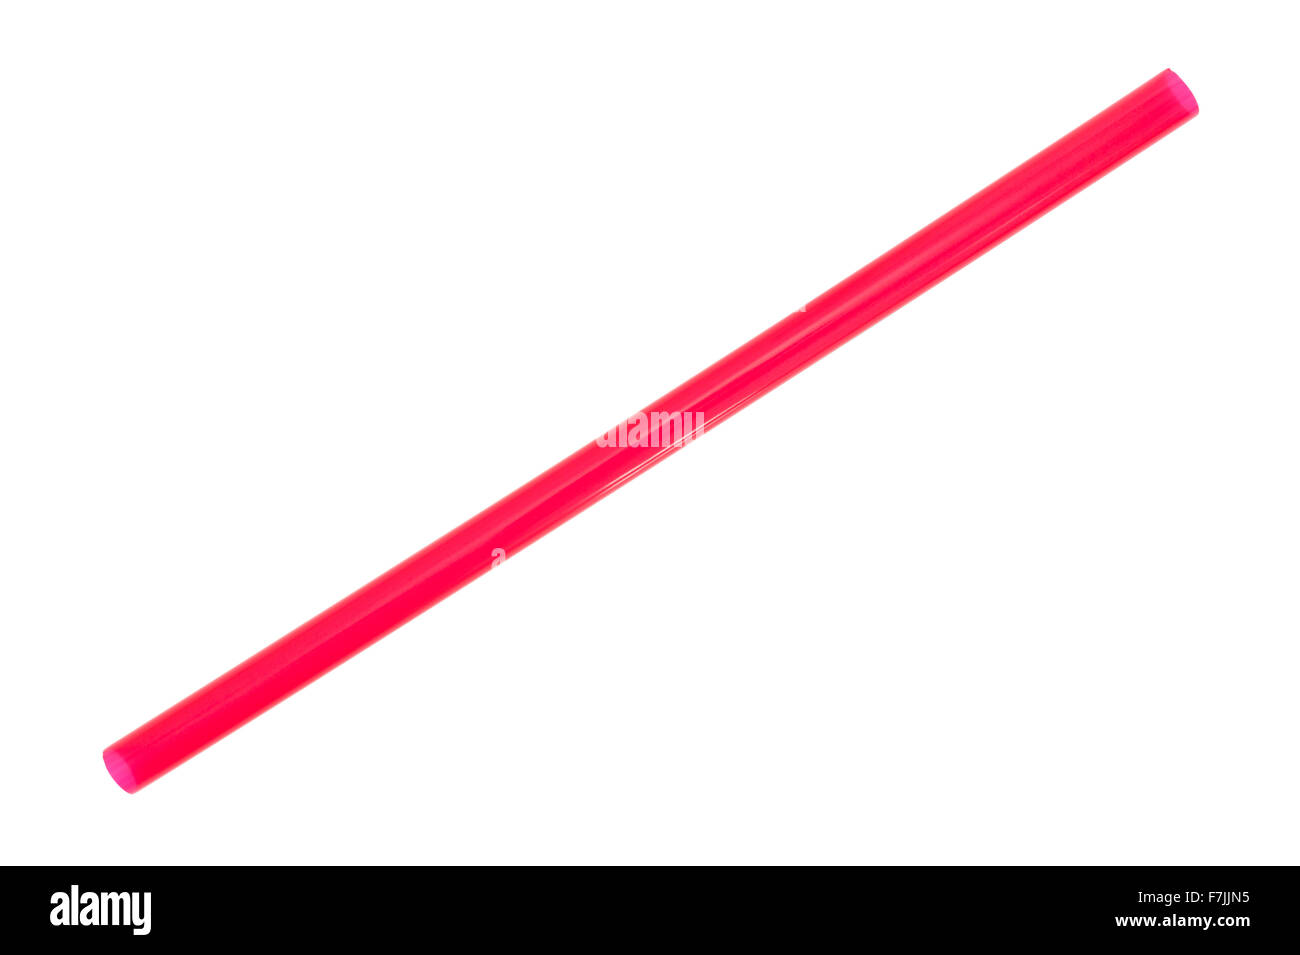 A jumbo sized red drinking straw for smoothies and milkshakes isolated on a white background. Stock Photo